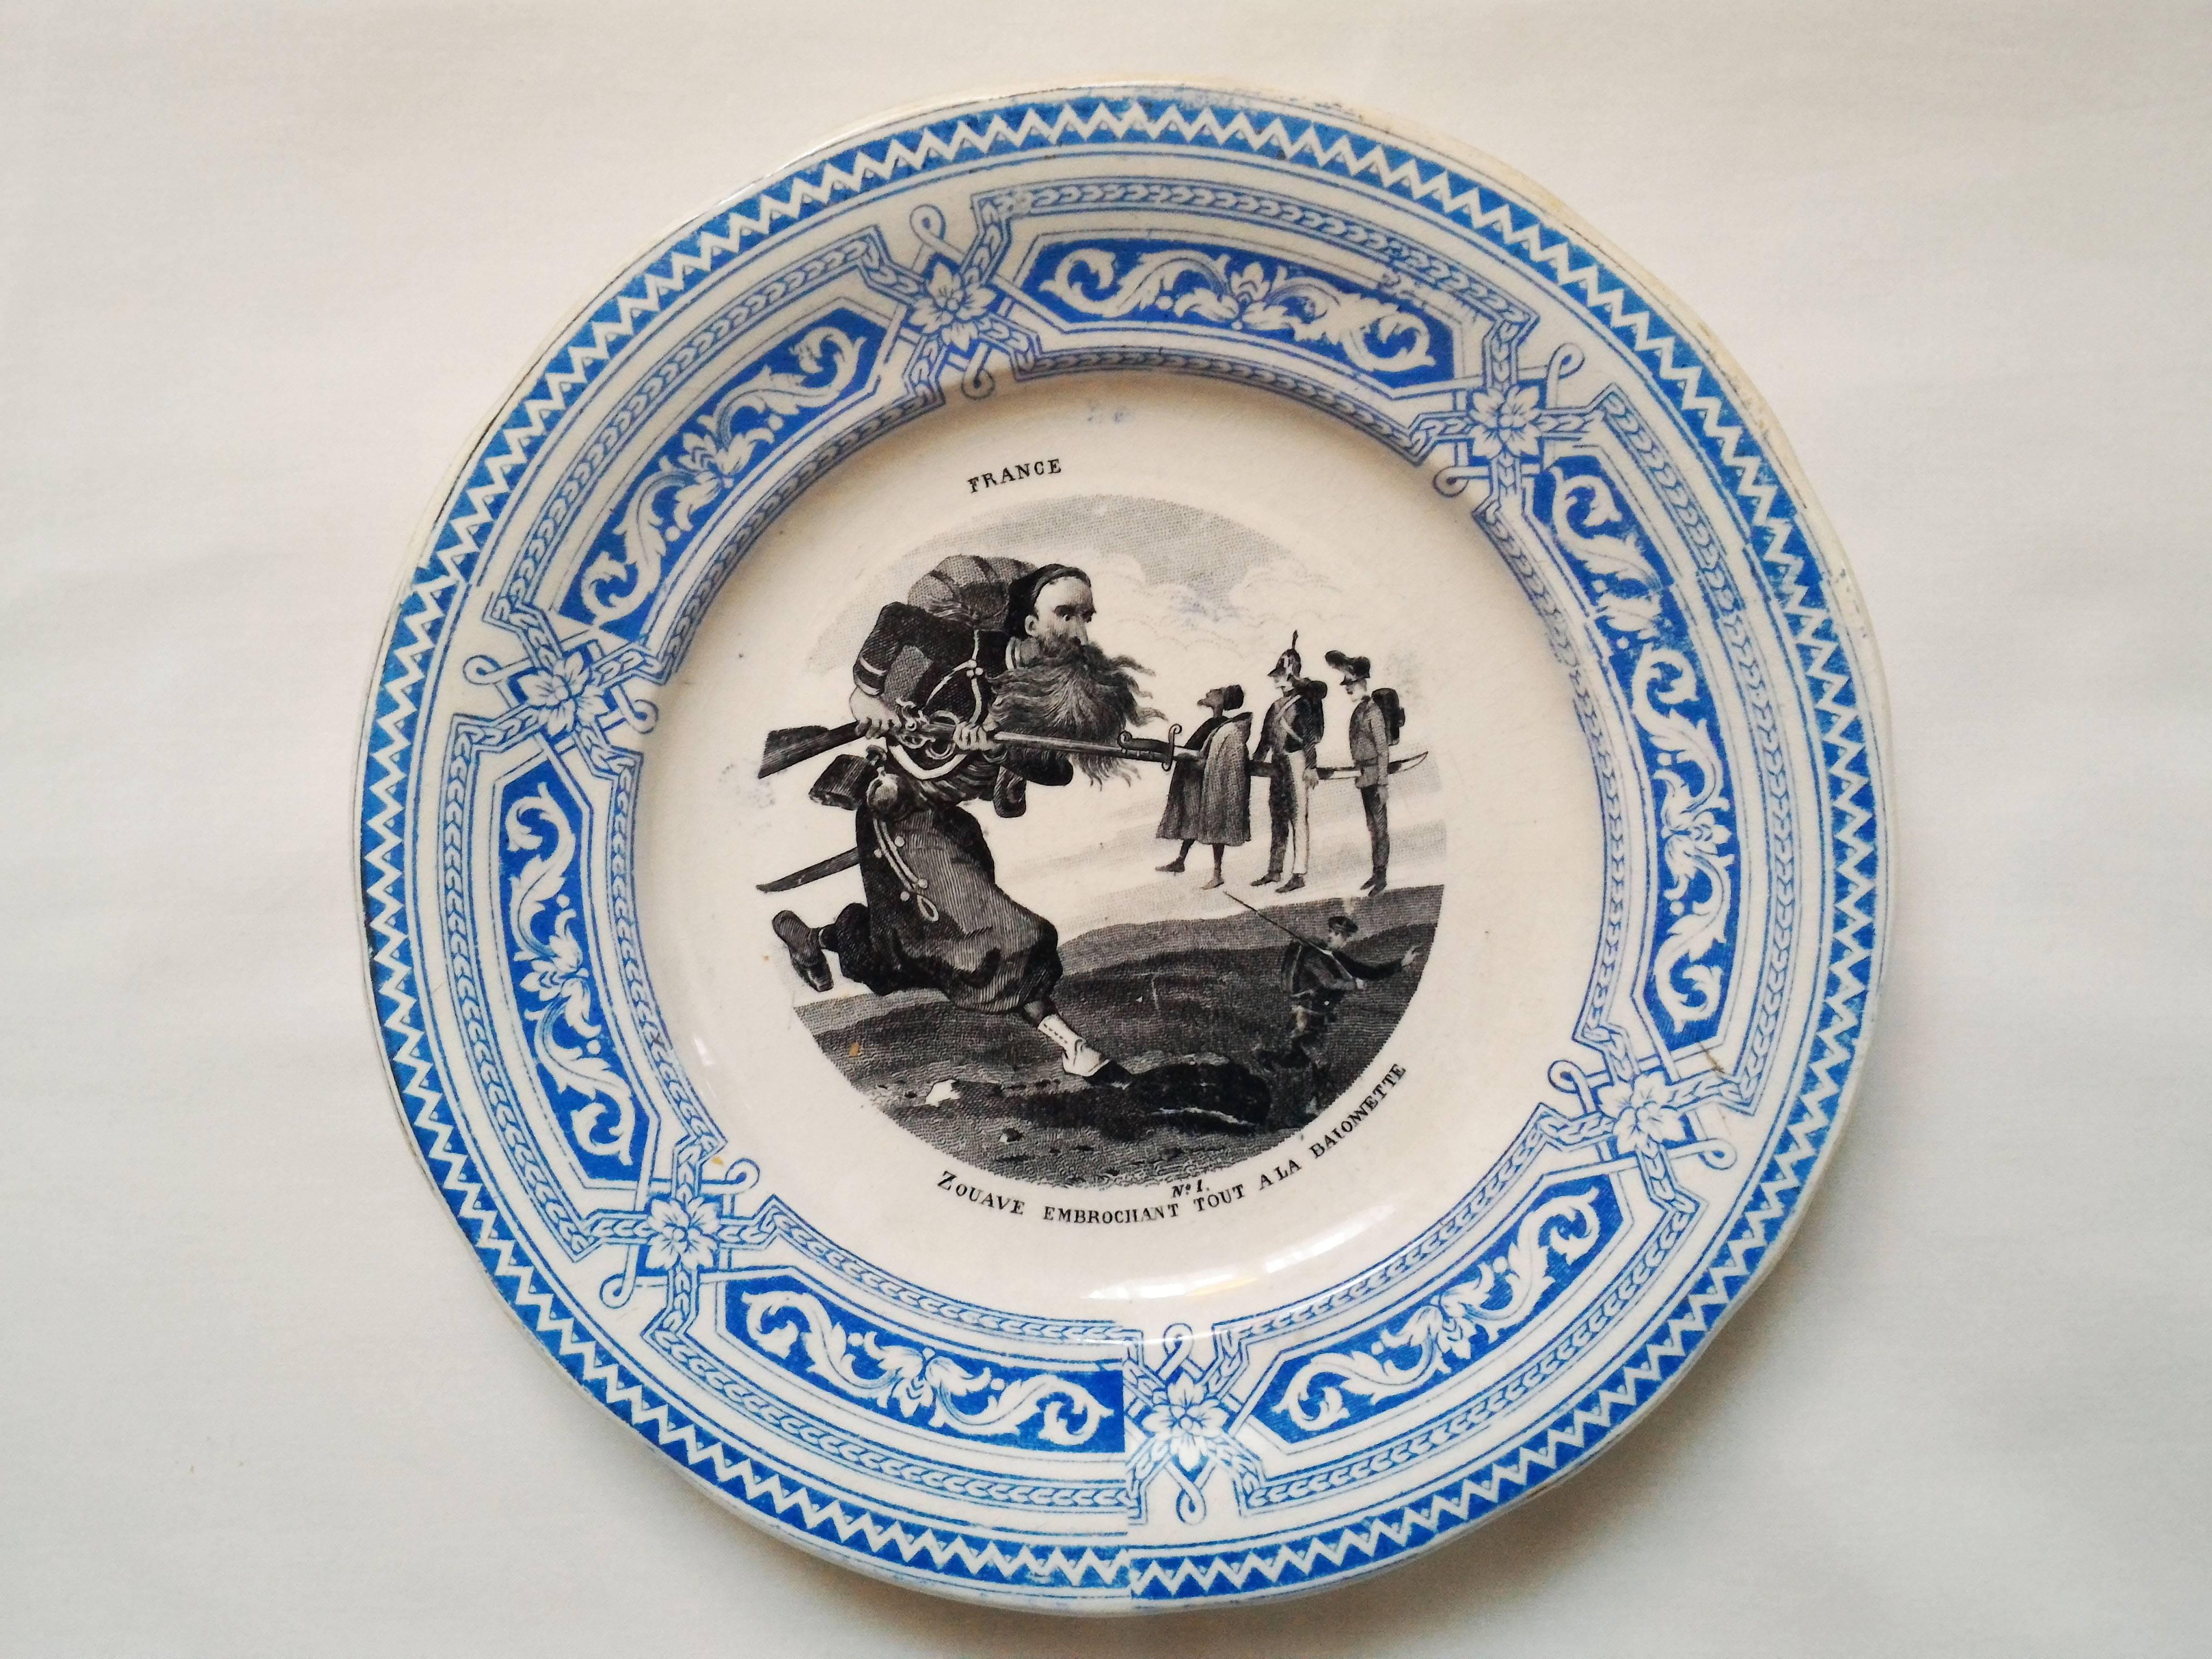 Amazing complete set of 12 talking plates showing each one a different and incredible situations in the French military life by the 19th century.

Beautiful colors and ornaments in blue, black and white.

Numbered and signed by Creil et